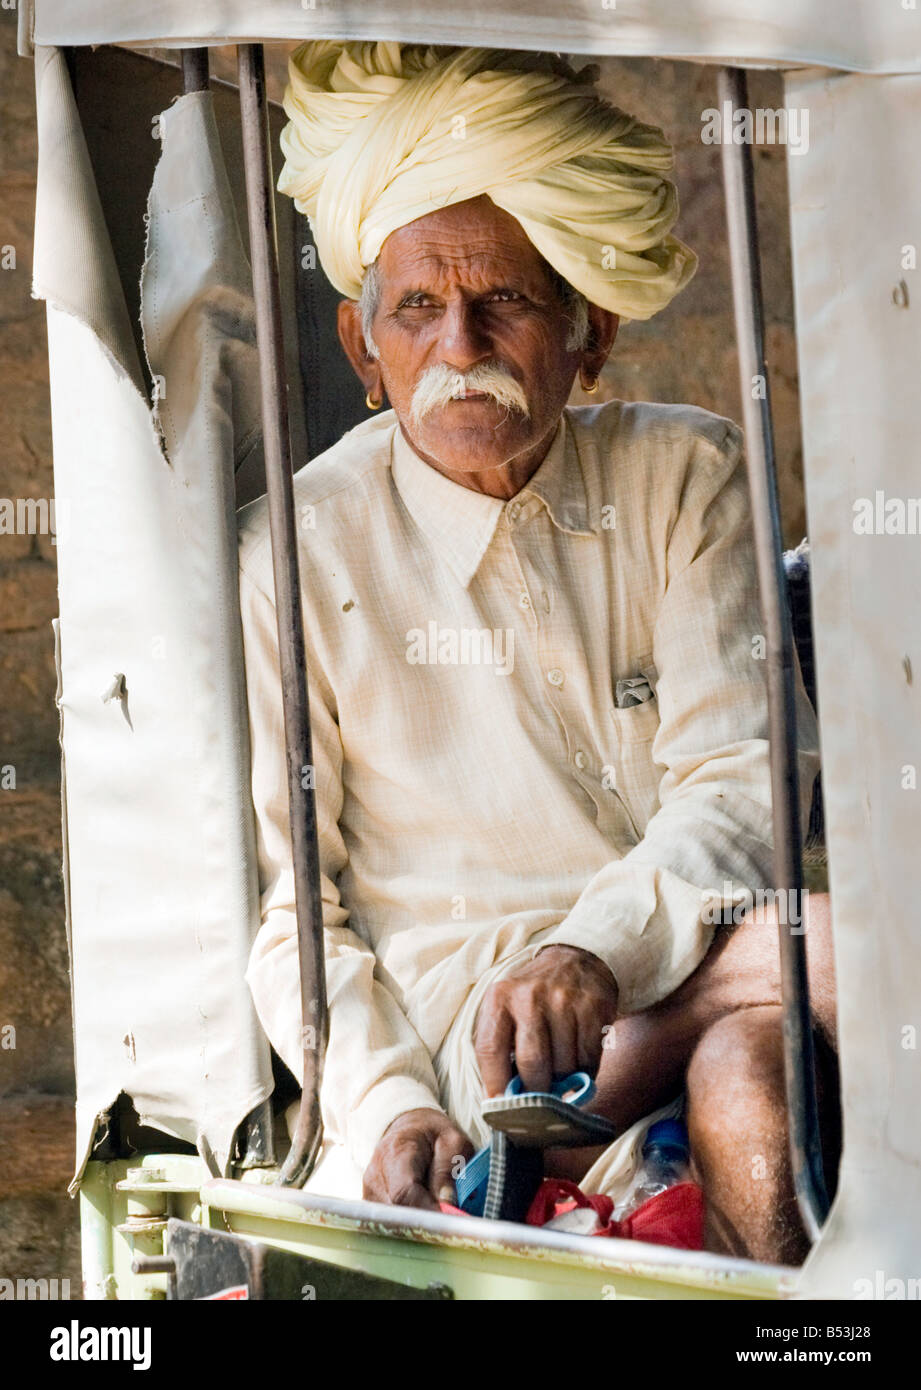 An elderly Indian man in a turban looks out of the back of a jeep, Ranthambore Temple, Rajasthan, India Stock Photo